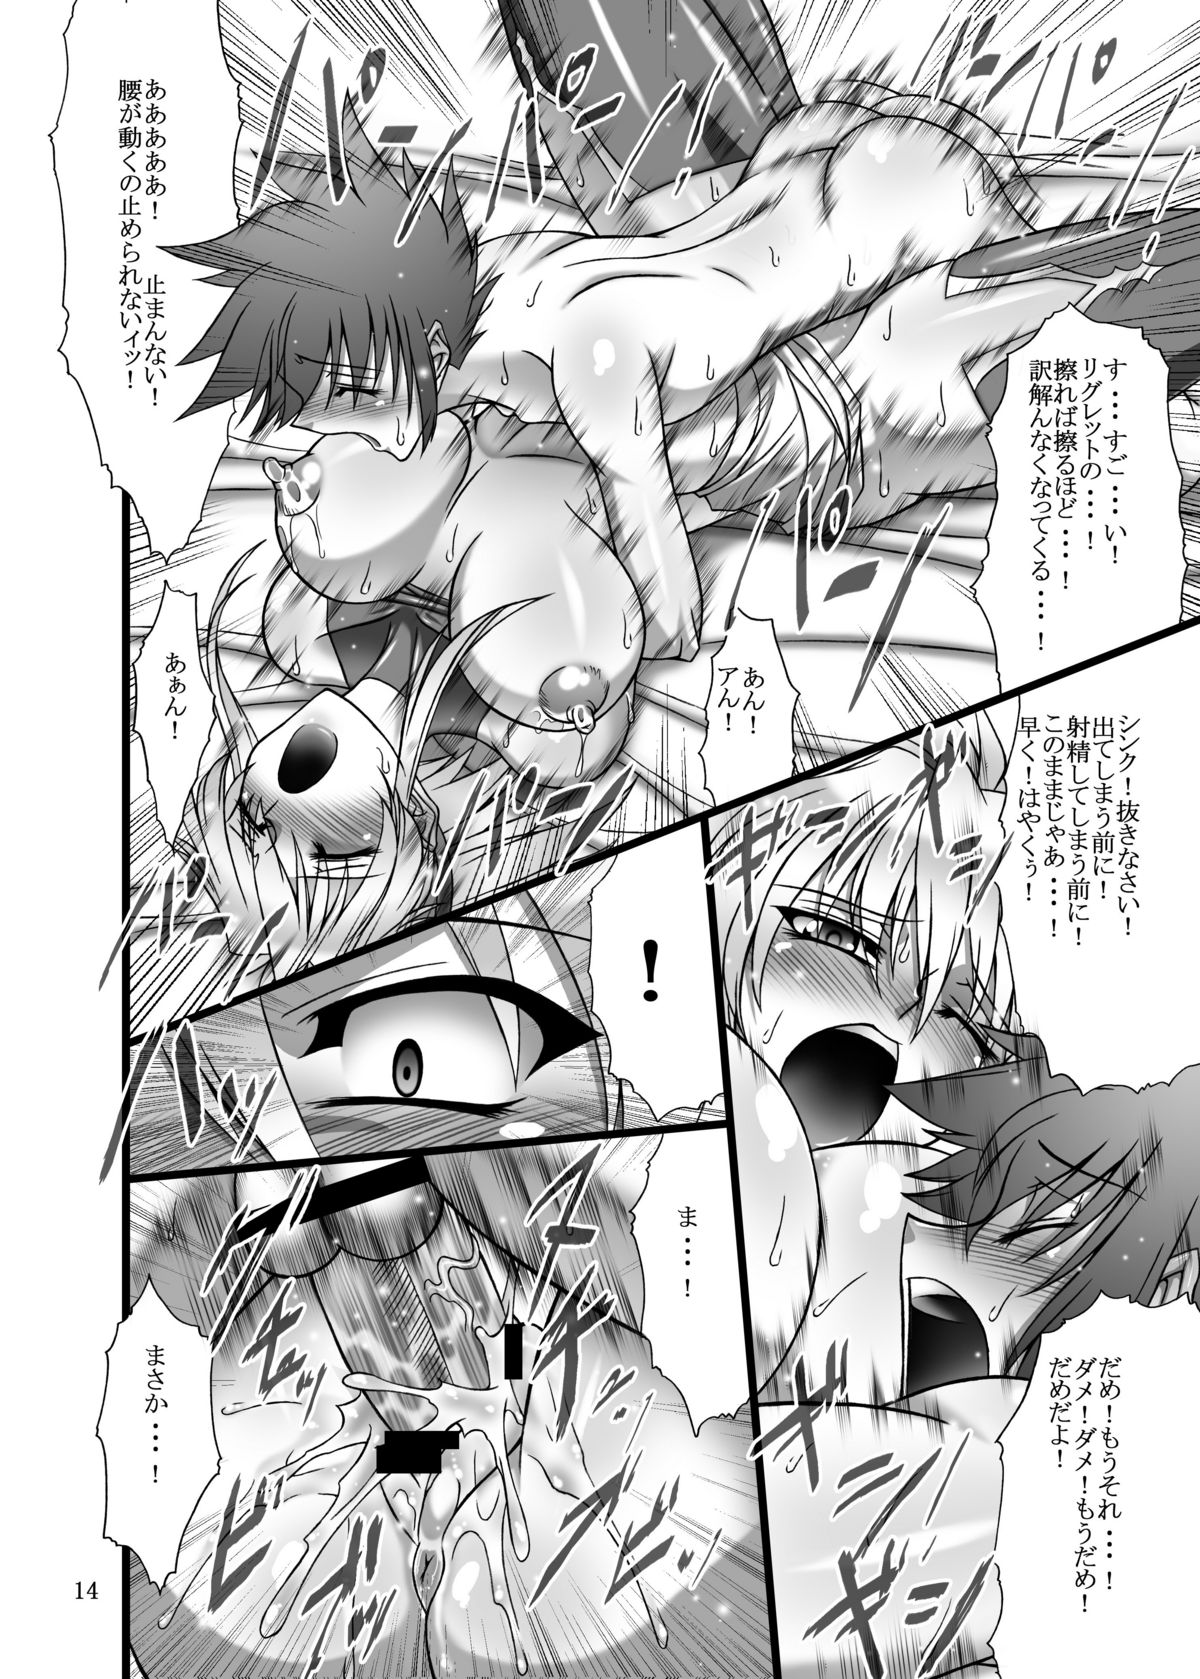 (C78) [Bobcaters (Hamon Ai, r13)] Kyoudou (Tales of the Abyss) page 14 full